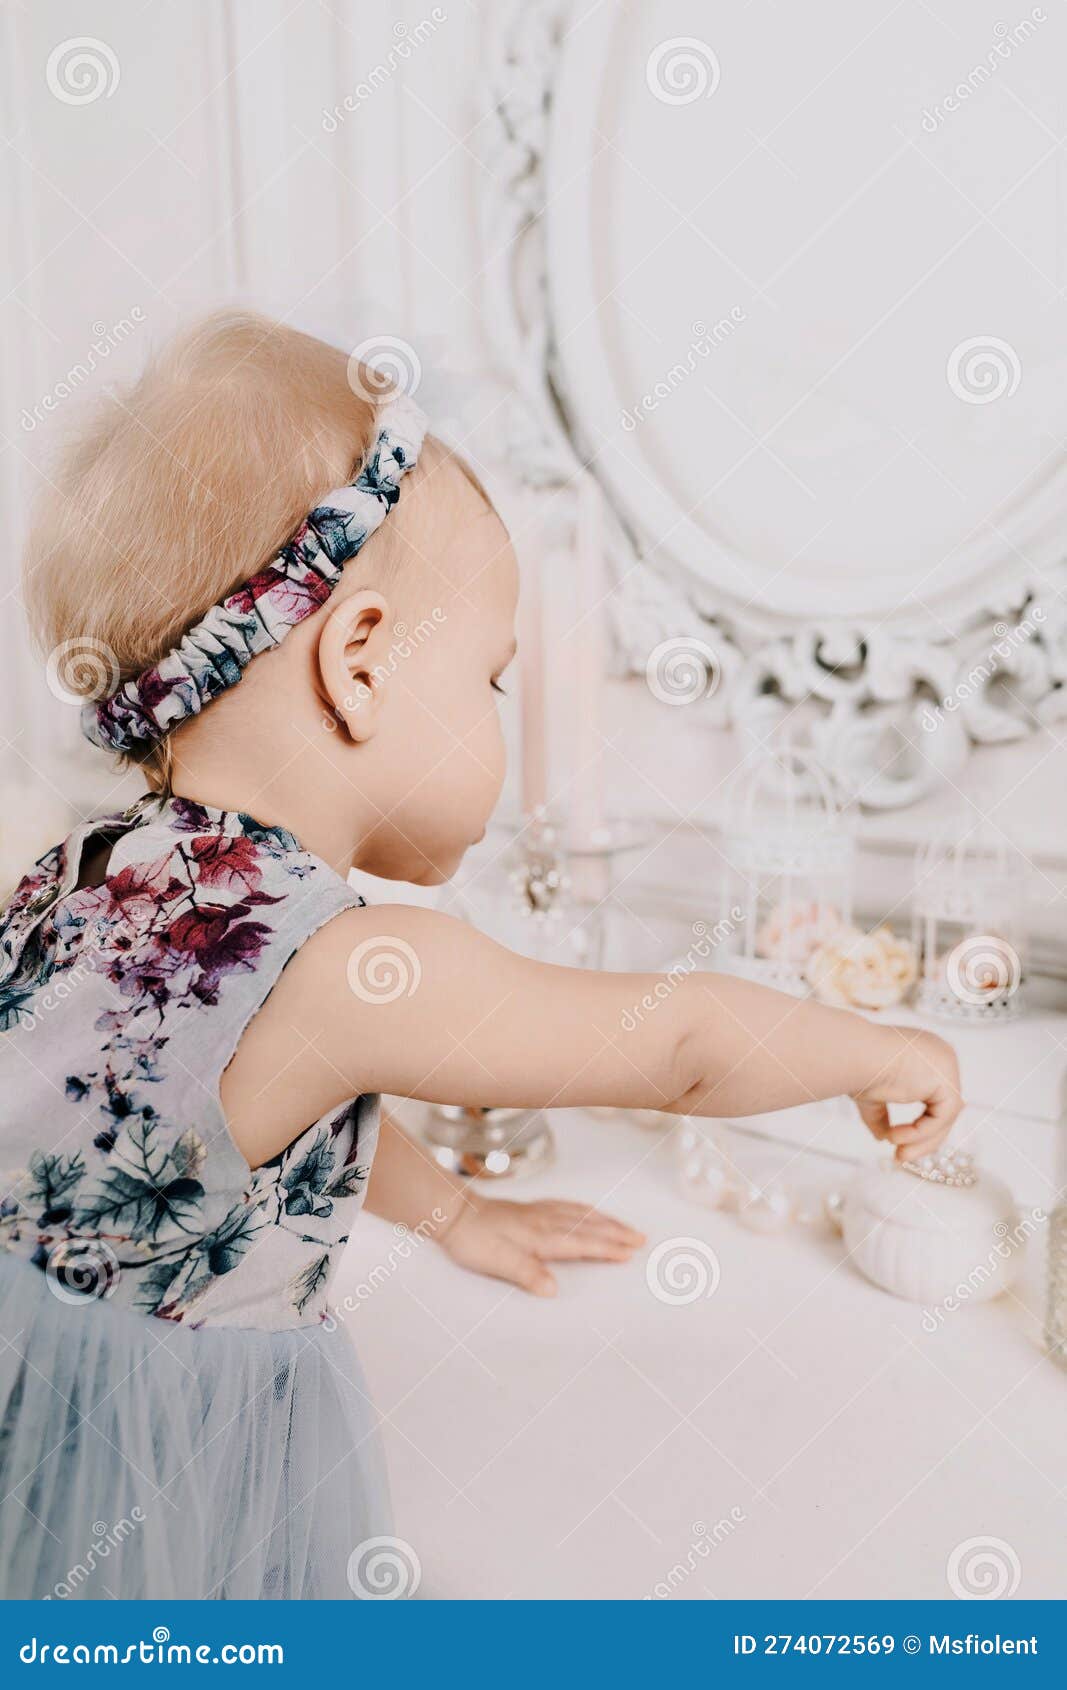 Baby Girl Elegant Dress. a One-year-old Girl in a Puffy Dress and a ...